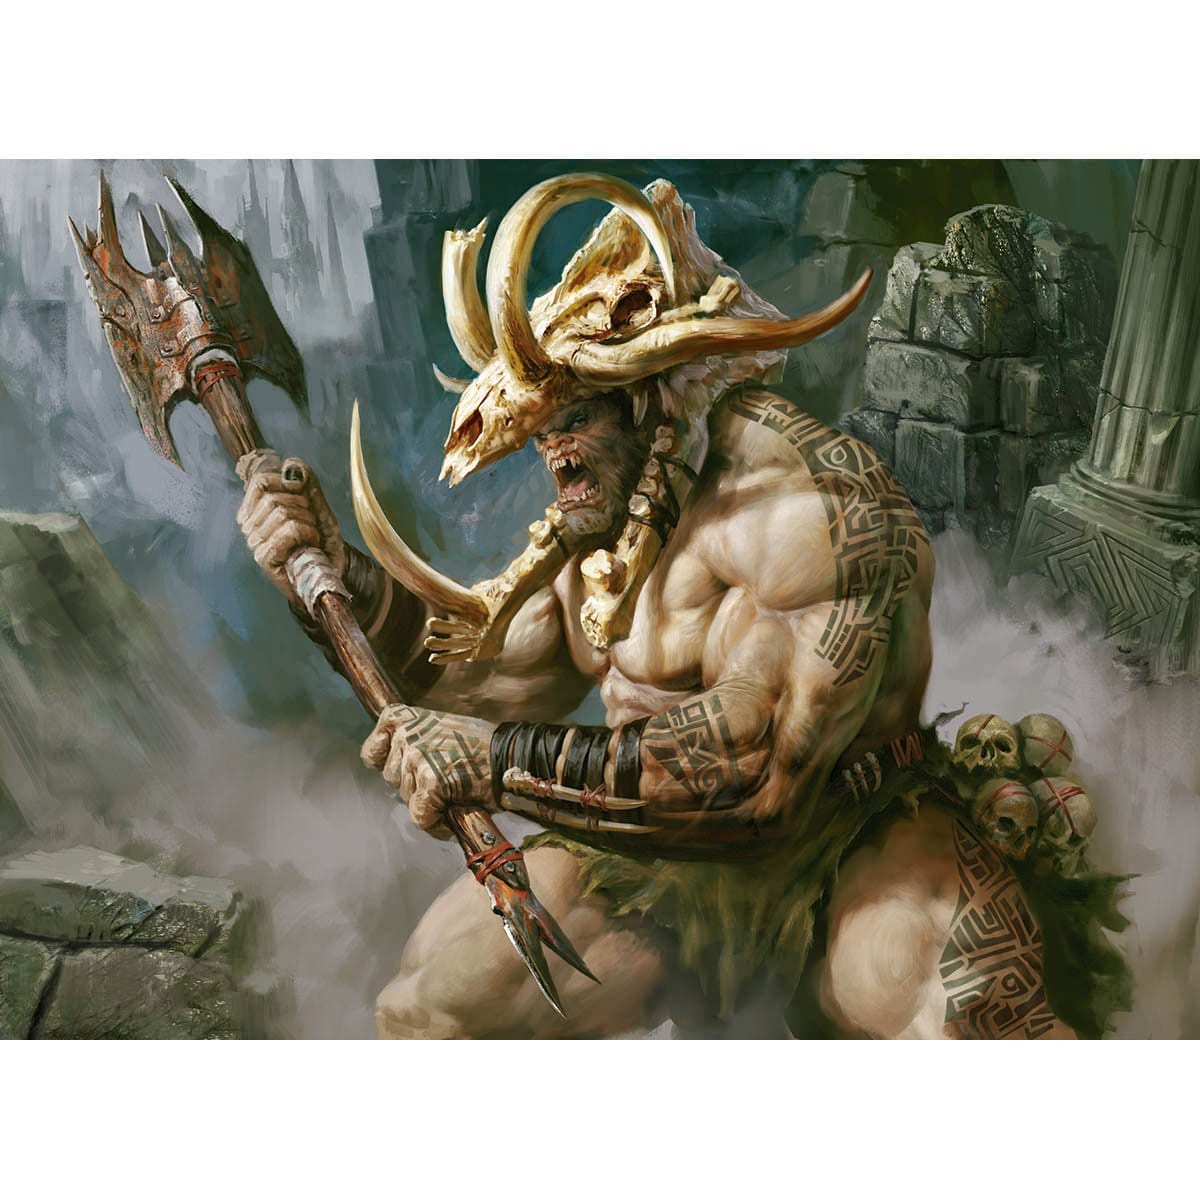 Ogre Painbringer Print - Print - Original Magic Art - Accessories for Magic the Gathering and other card games